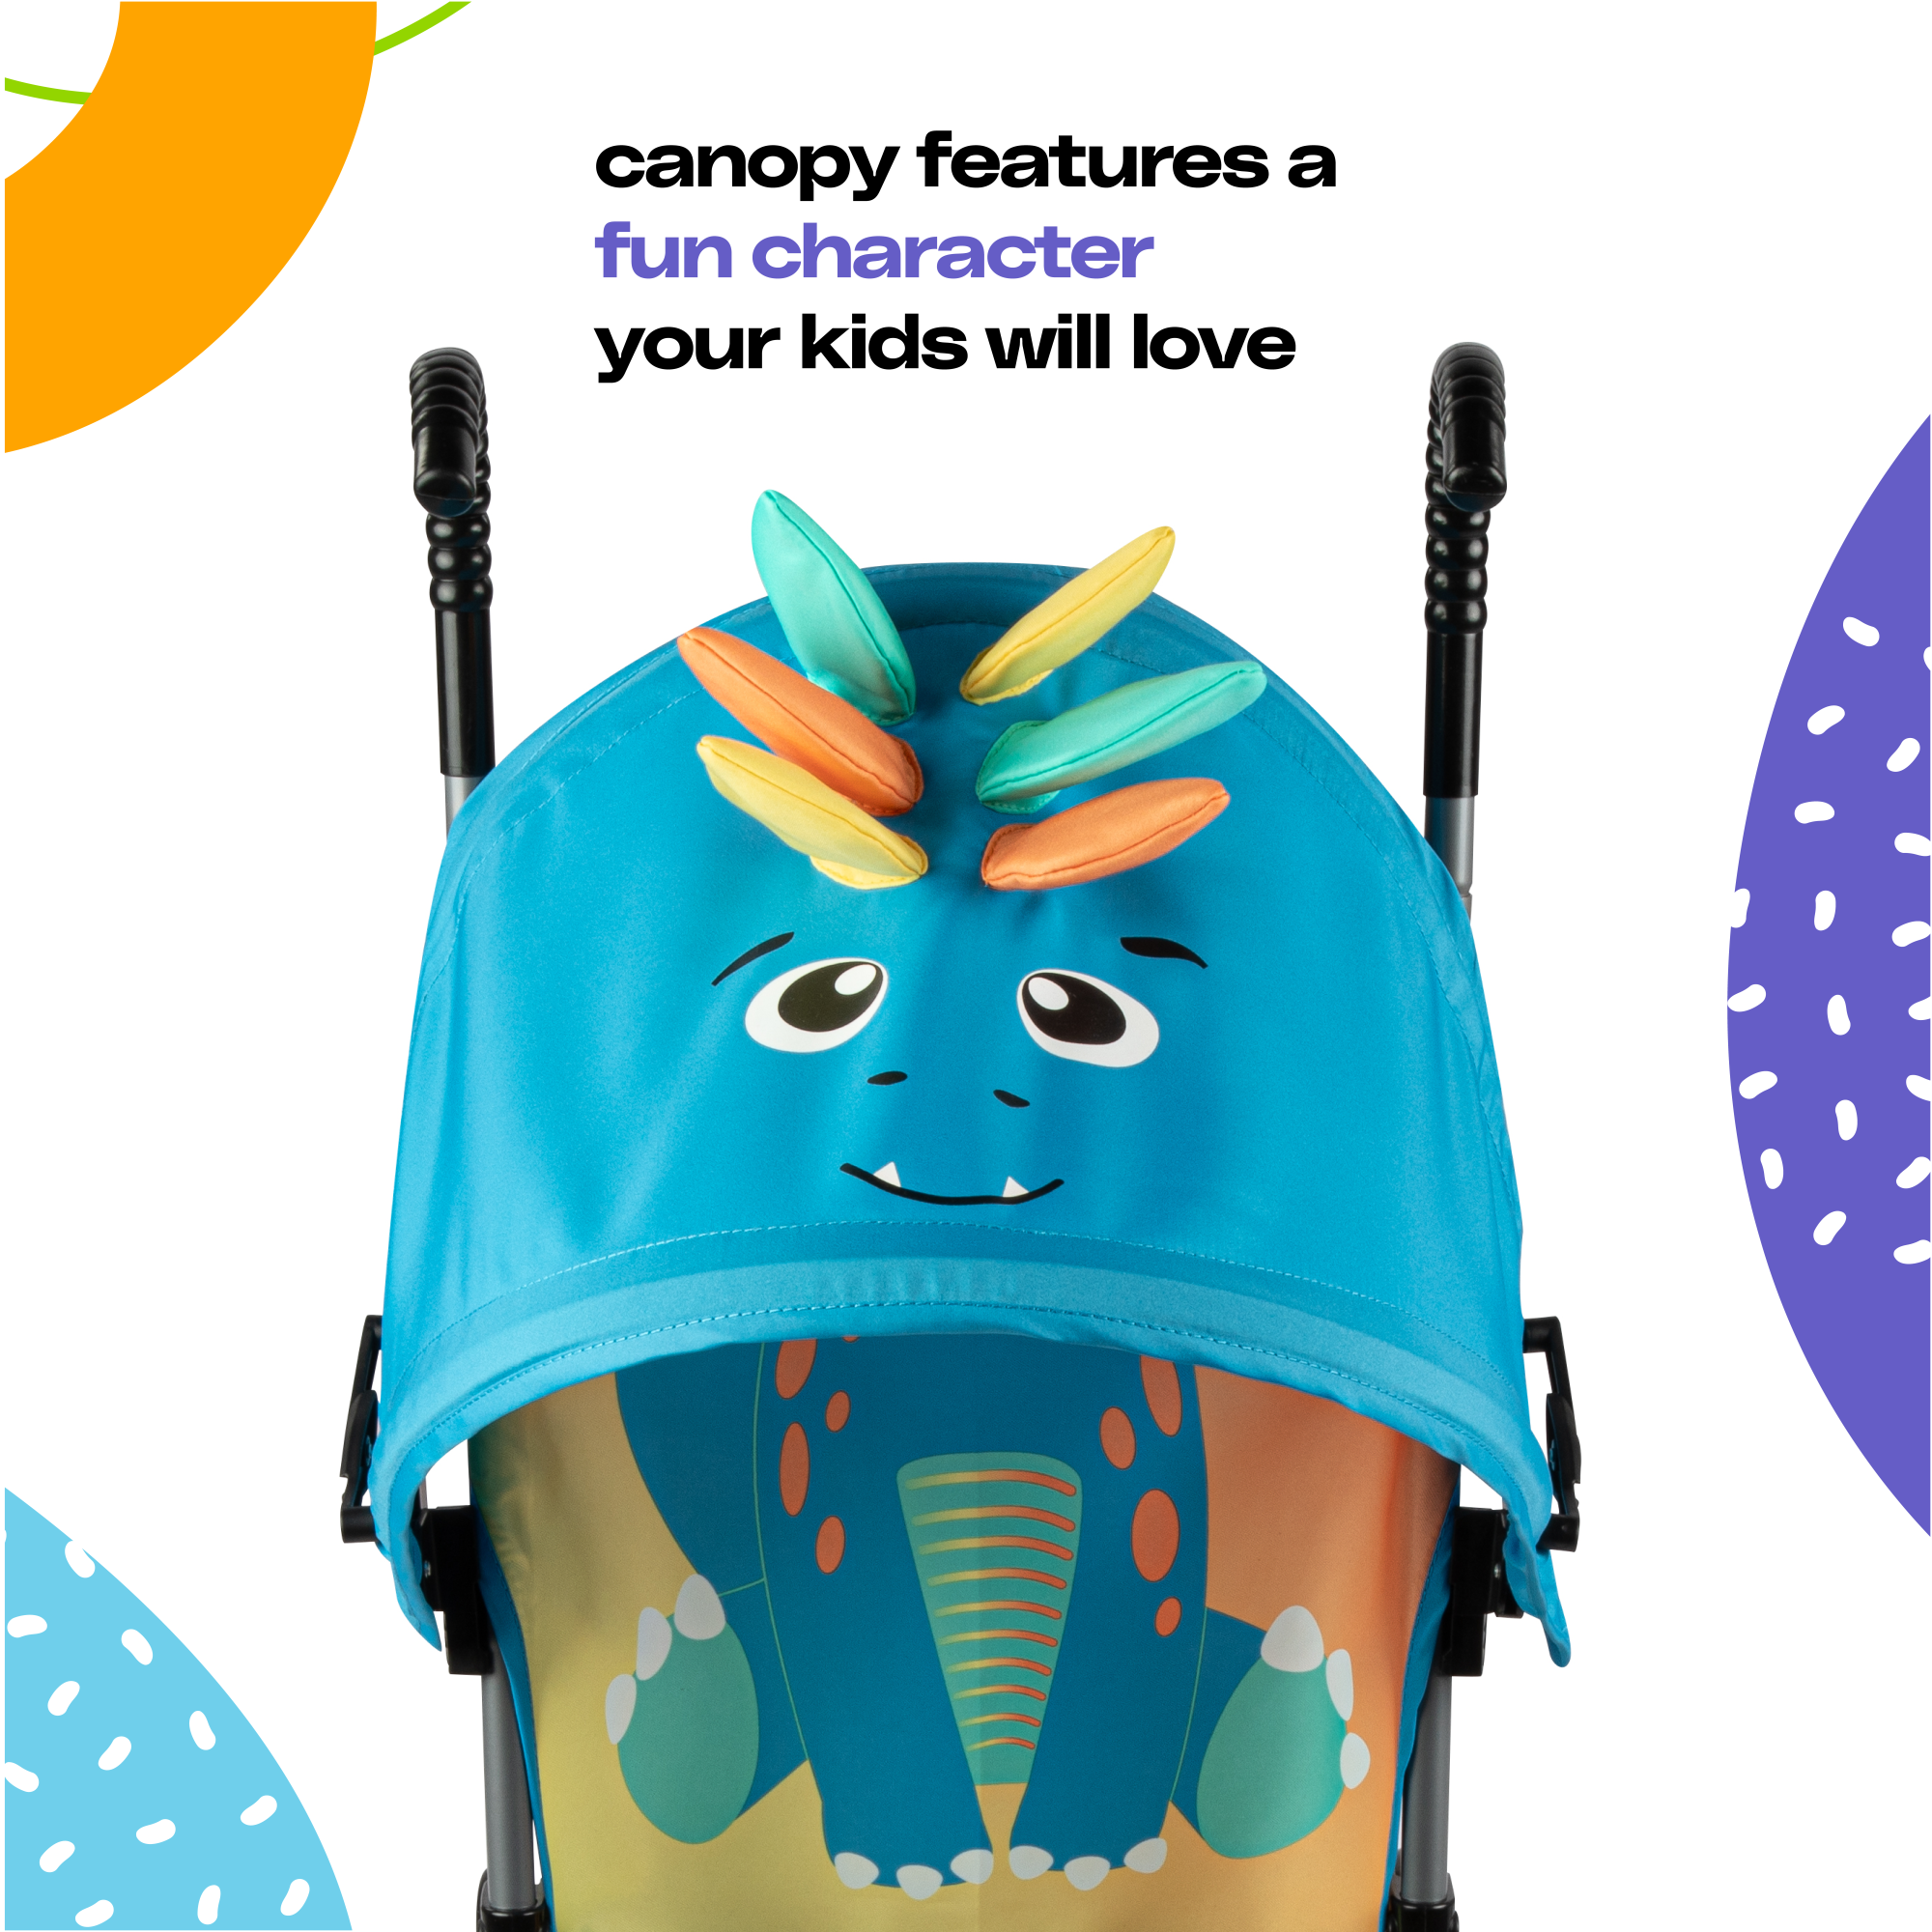 Cosco Kids™ Character Umbrella Stroller - Stewie Stegosaurus - canopy features a fun character your kids will love